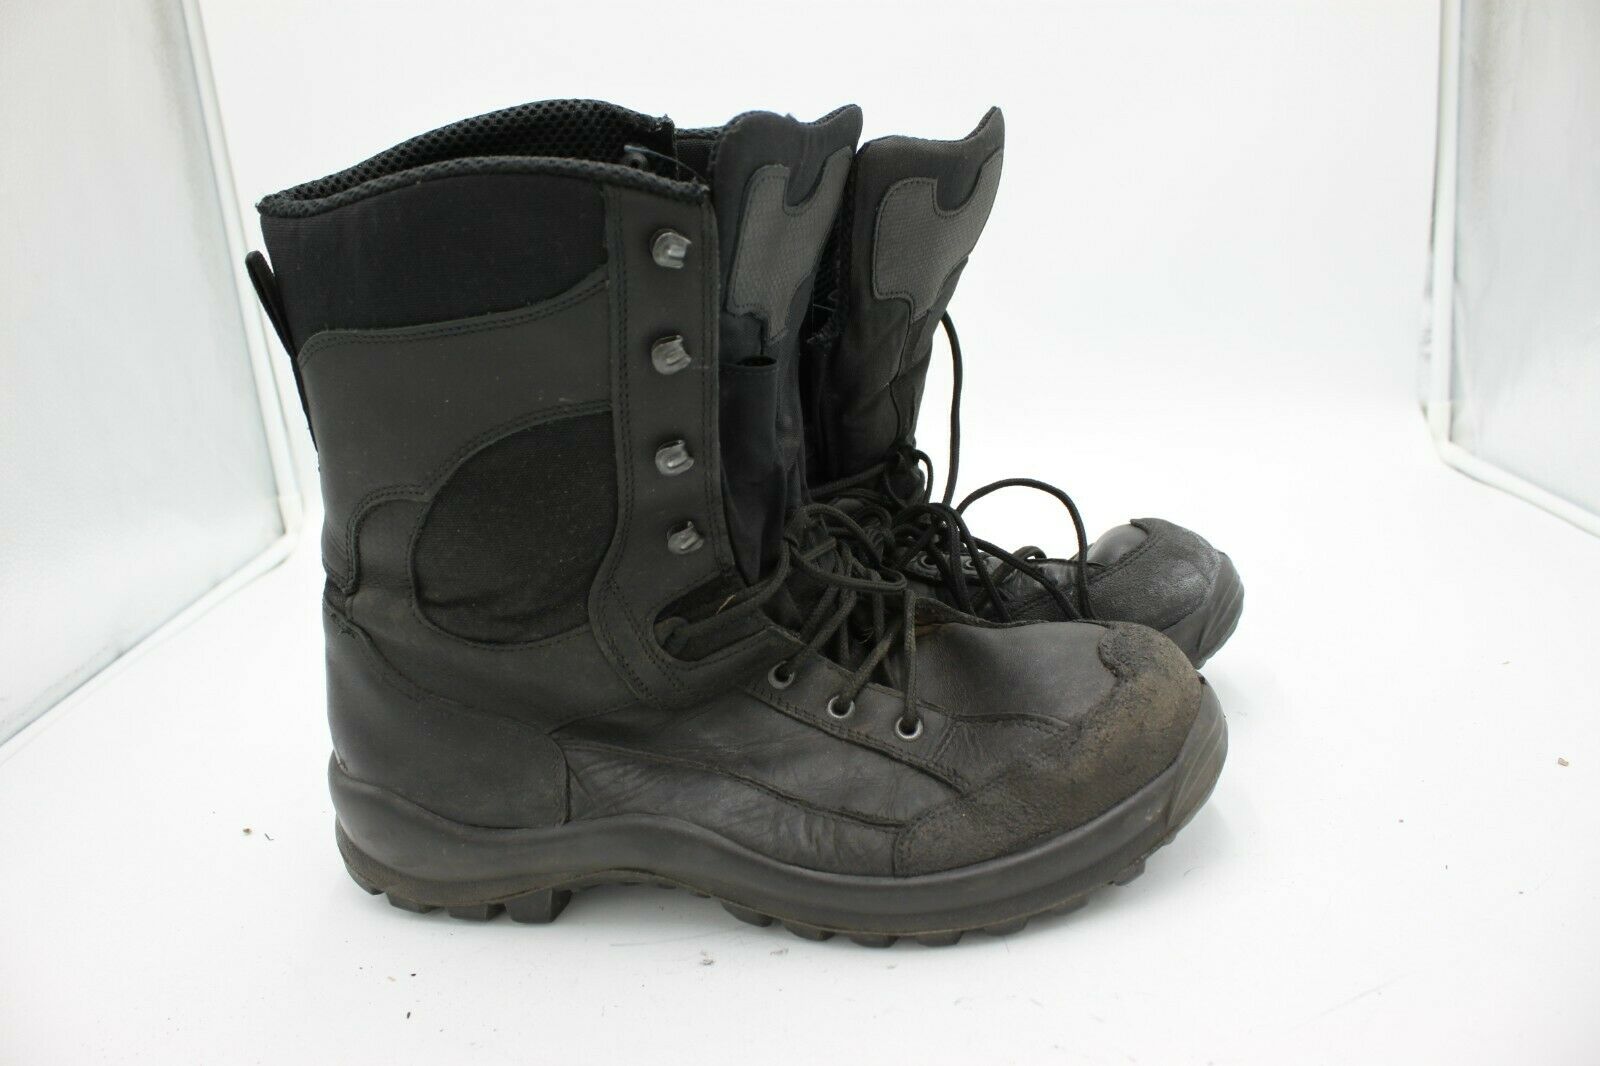 Austrian Military Jungle Combat Boots Stumpp & Baier Lightweight Used Size 12 US (ASB312)